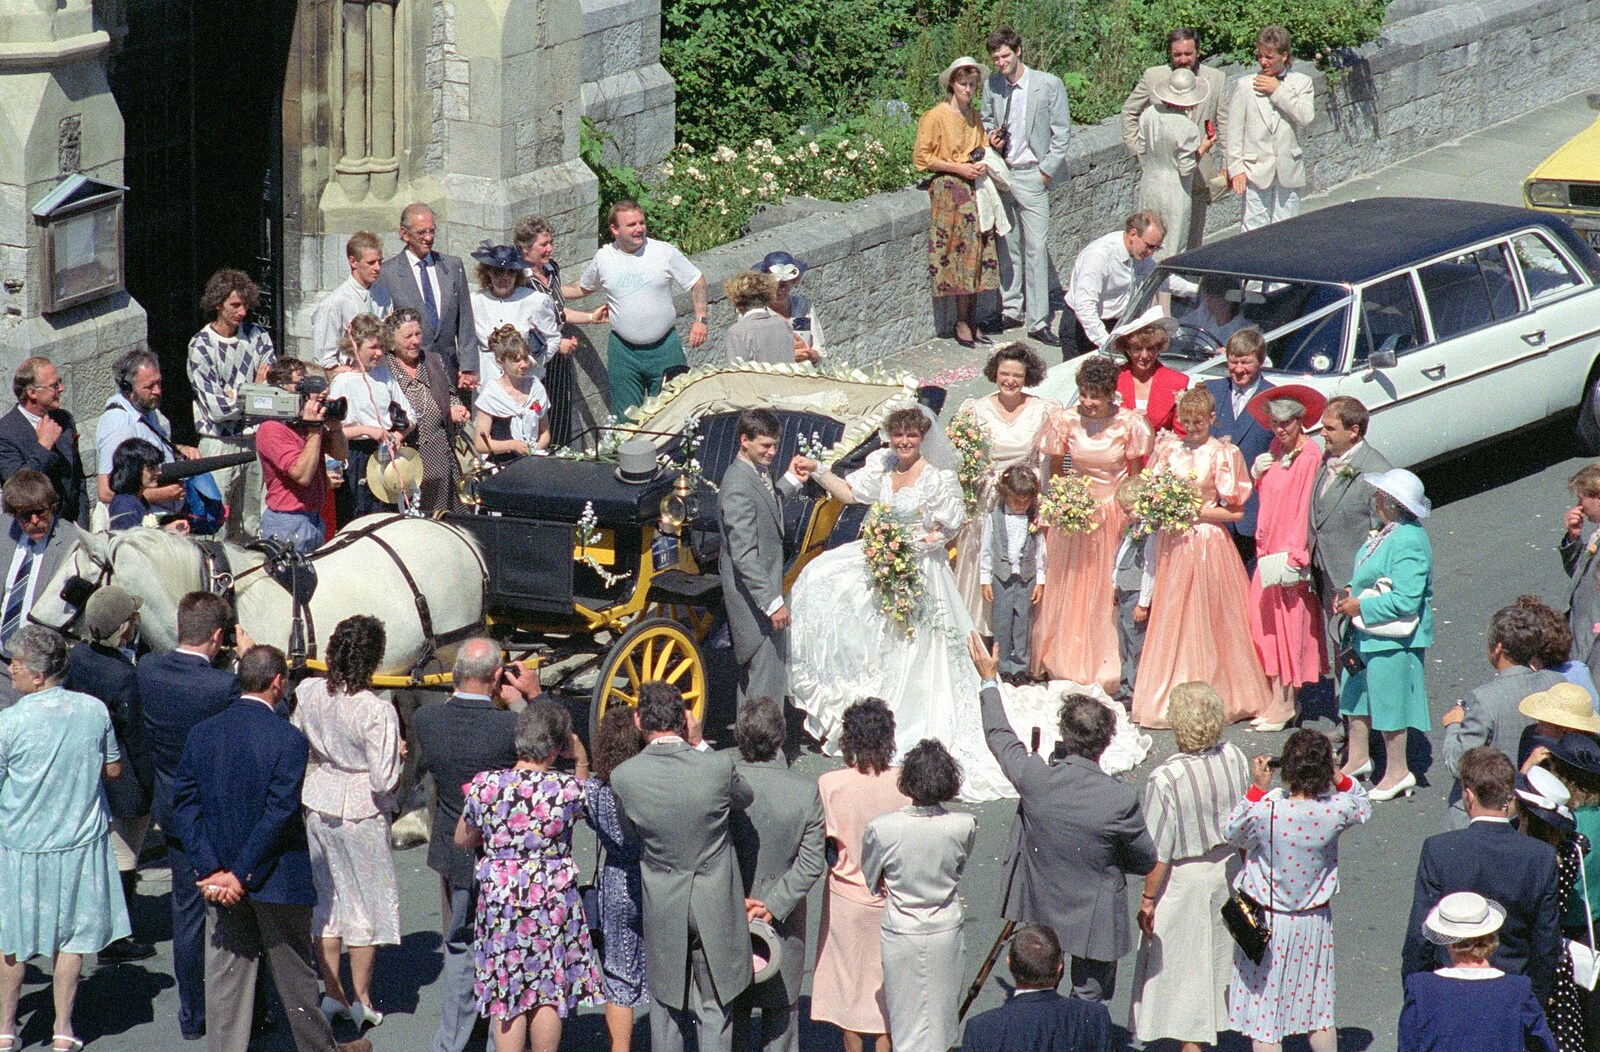 Uni: Risky Business, A Wedding Occurs and Dave Leaves, Wyndham Square, Plymouth - 15th July 1989: The teeming throngs see the bride and groom off